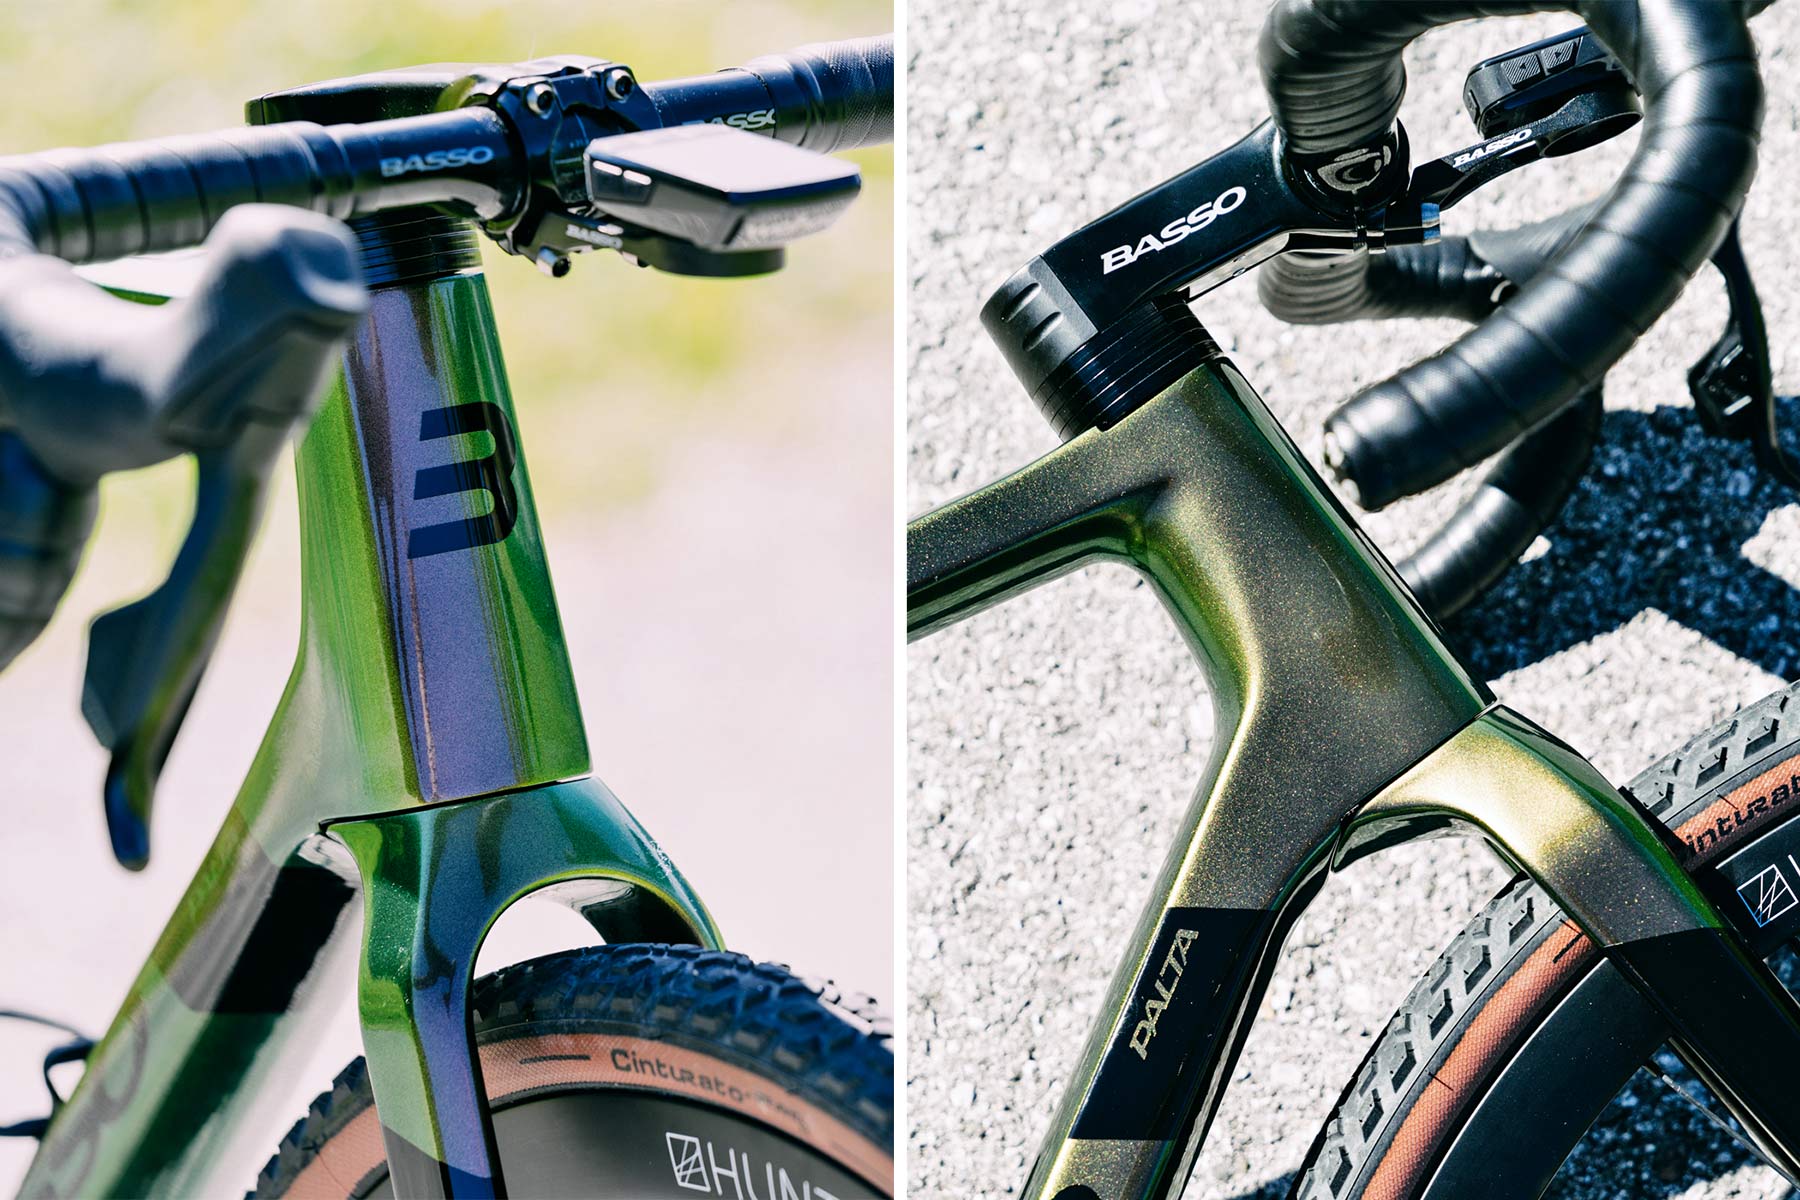 2022 Basso Palta II carbon gravel bike review made-in-Italy, photo by Francesco Bonato, front end headtube